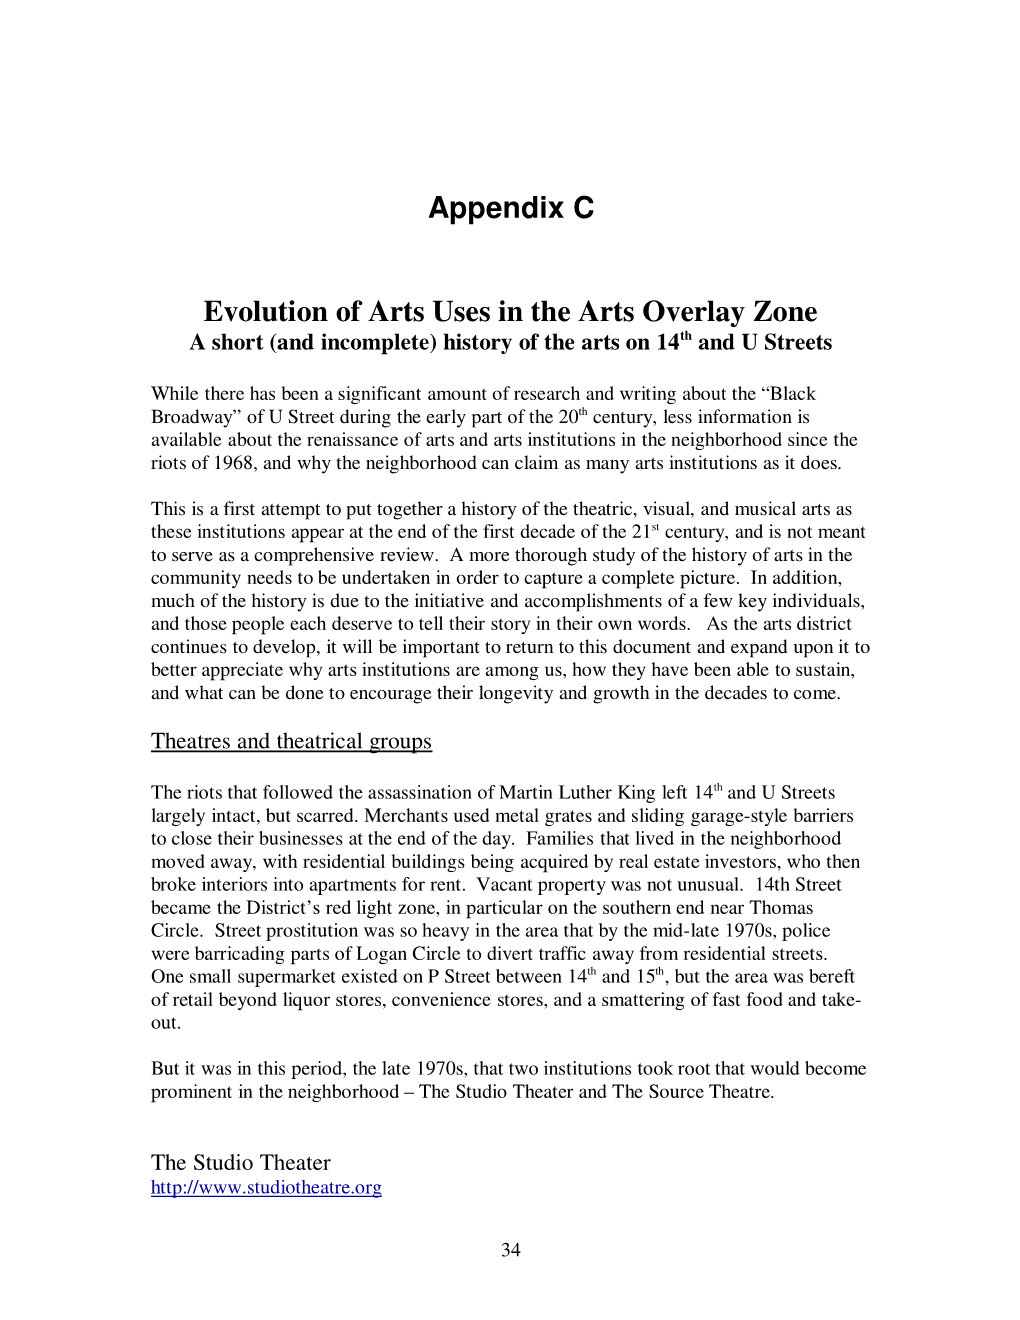 Appendix C Evolution of Arts Uses in the Arts Overlay Zone